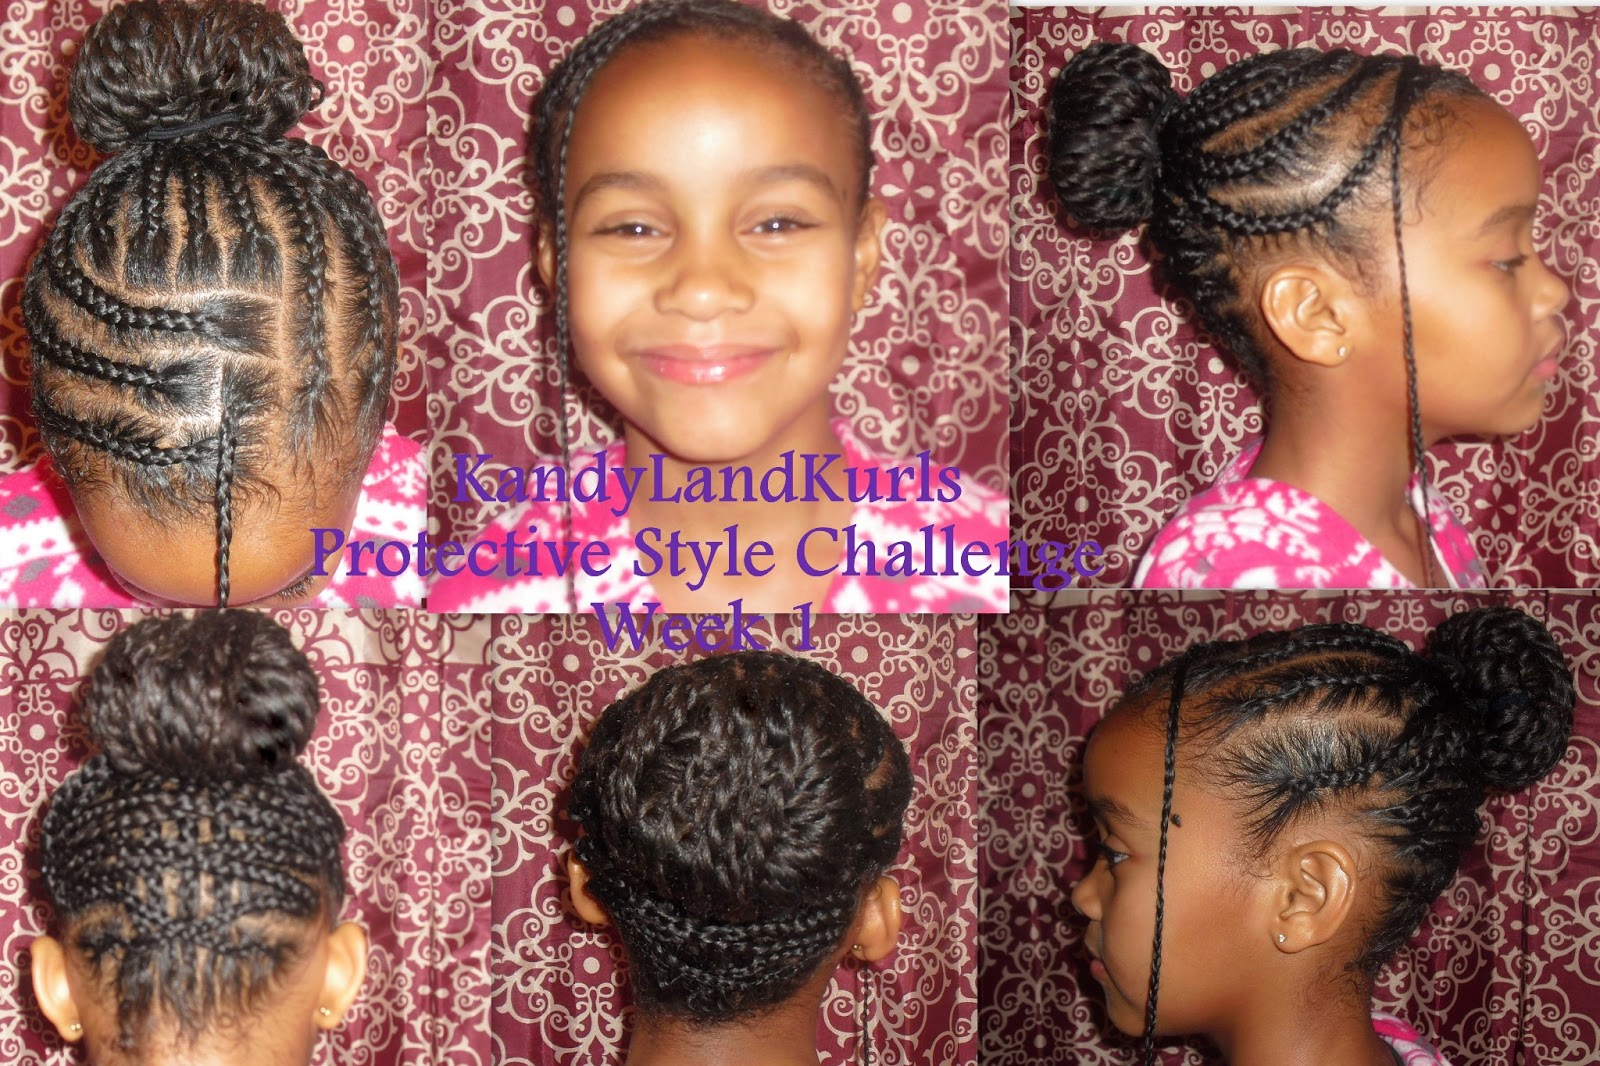 Box Braid Hairstyles For Black Women 2013 Her friends at Girl Scouts really loved her hairstyle, and asked me 